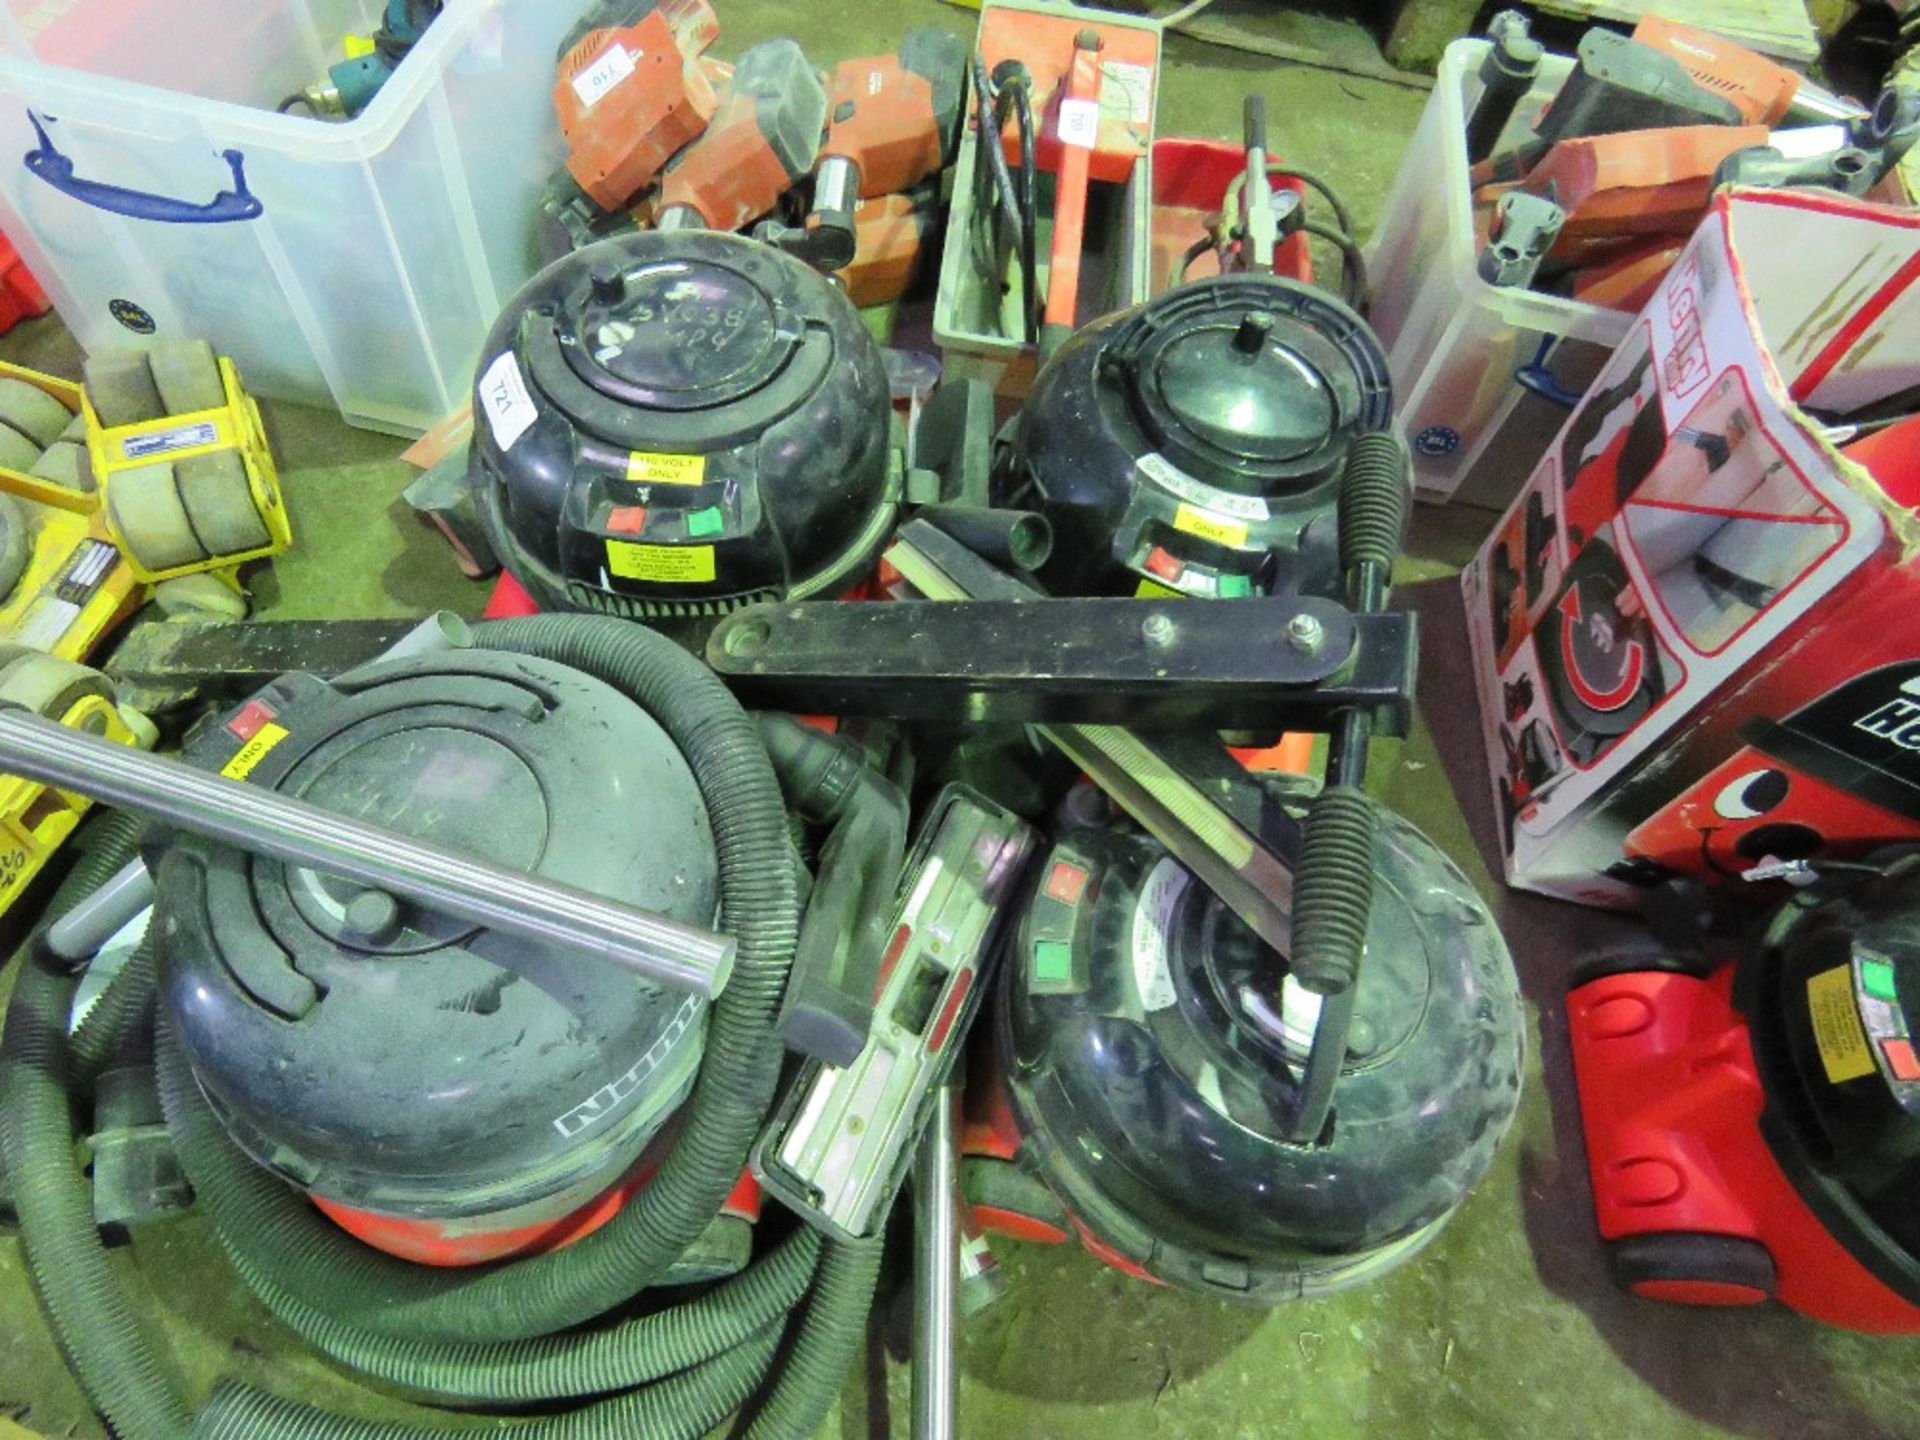 4 X HENRY VACUUM HOOVERS. SOURCED FROM DEPOT CLEARANCE DUE TO A CHANGE IN COMPANY POLICY. - Image 2 of 2